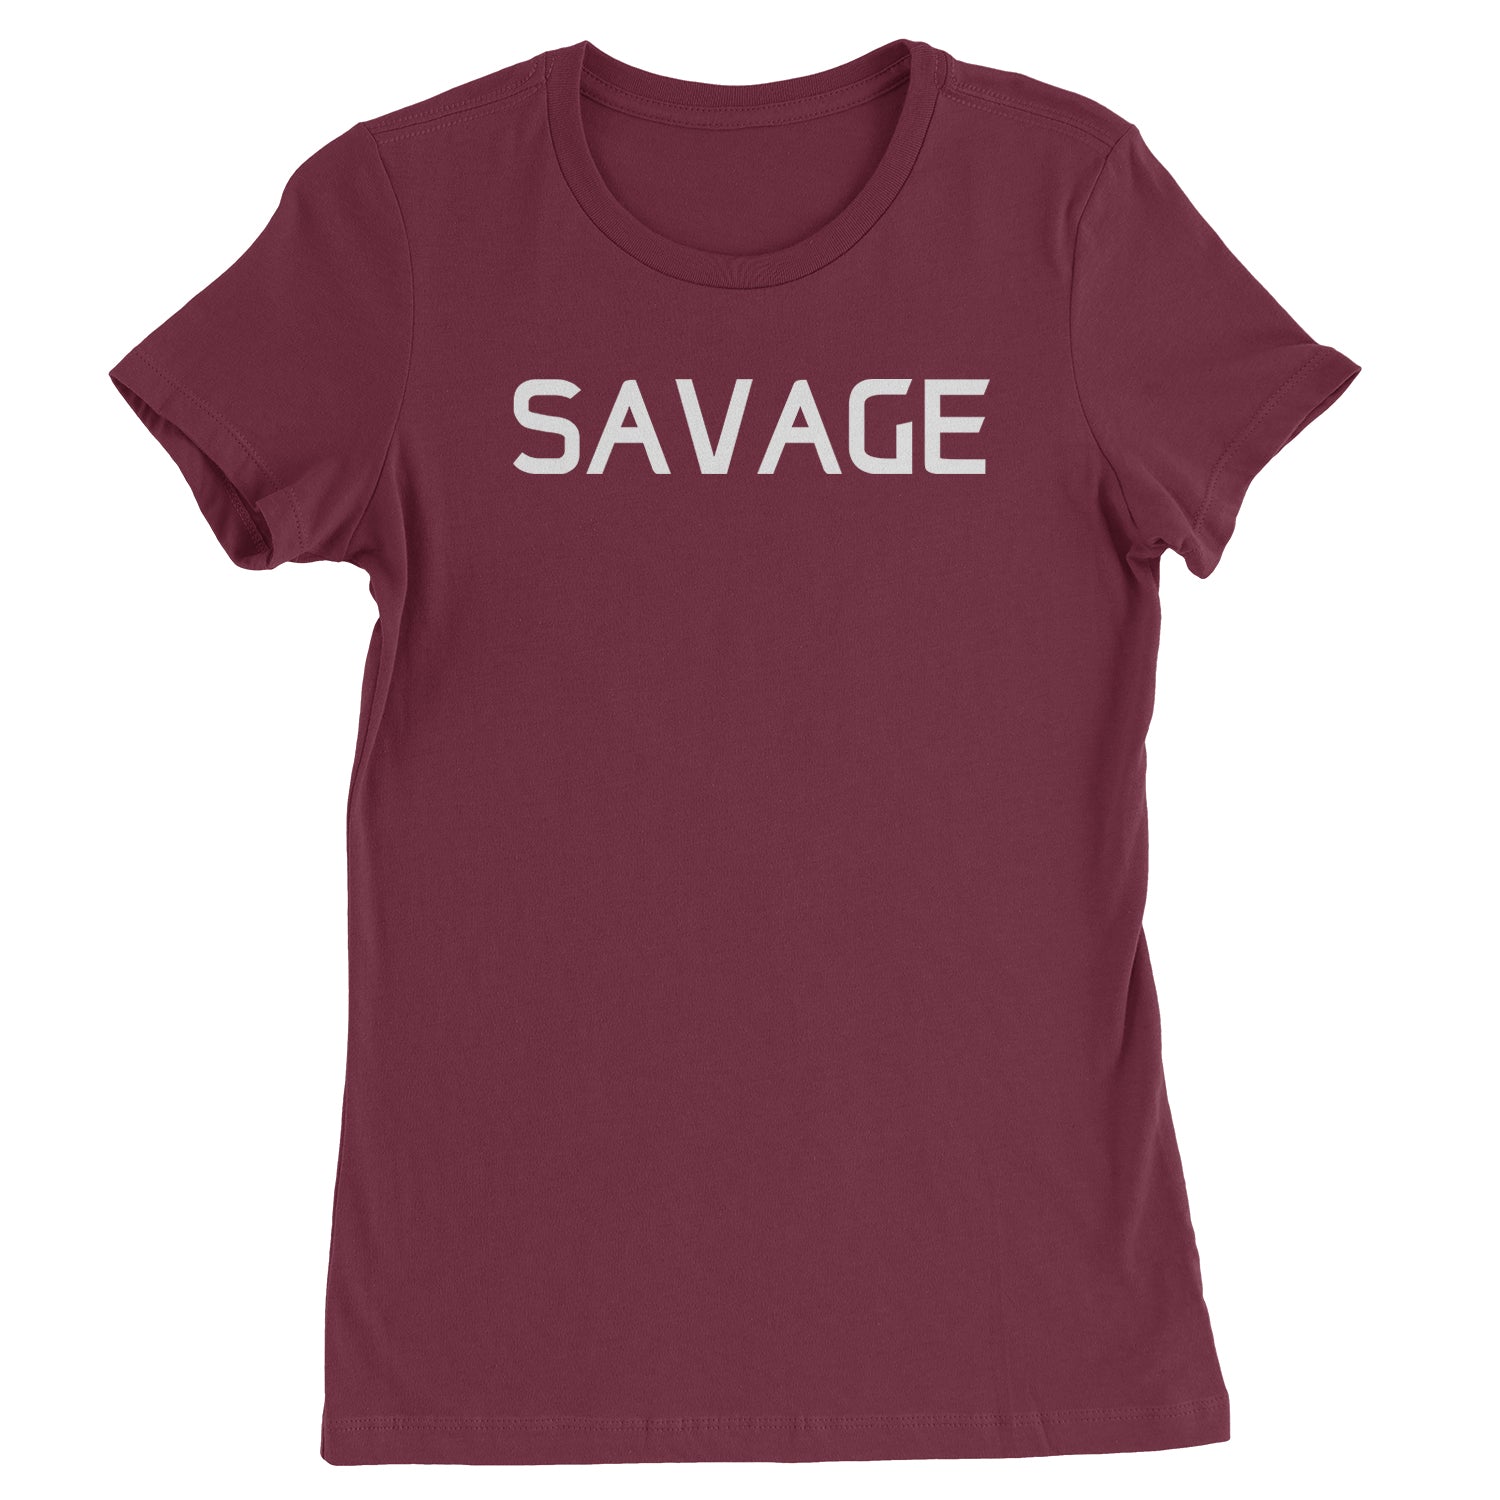 Savage Womens T-shirt #expressiontees by Expression Tees